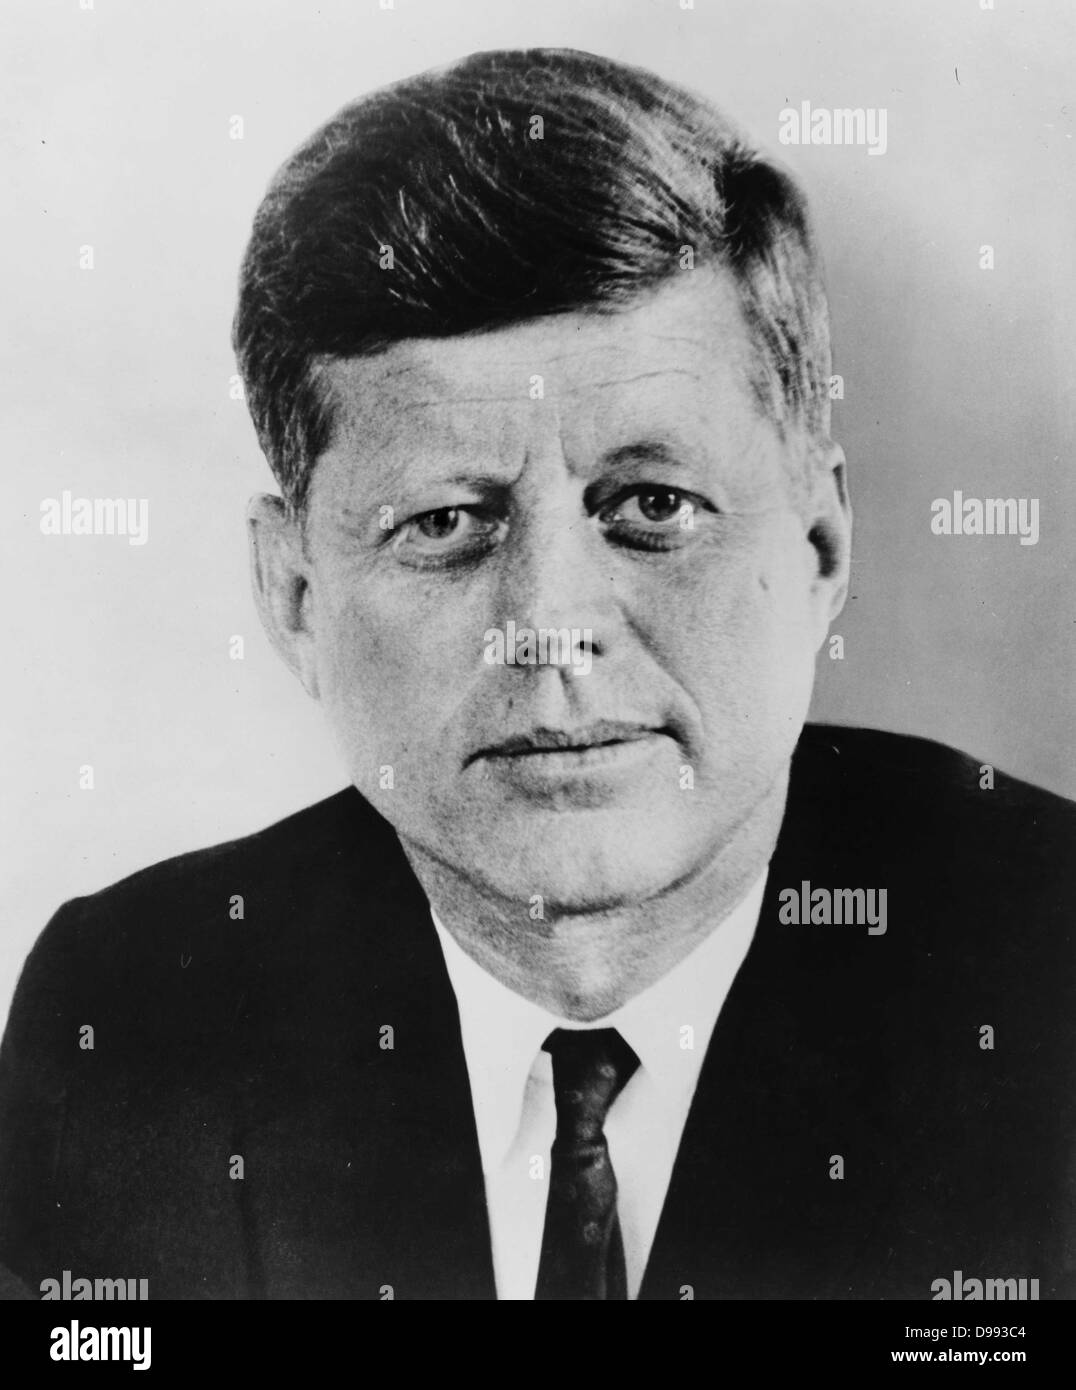 John Fitzgerald Kennedy (May 29, 1917 – November 22, 1963), 35th President of the United States, serving from 1961 until his assassination in 1963. Stock Photo